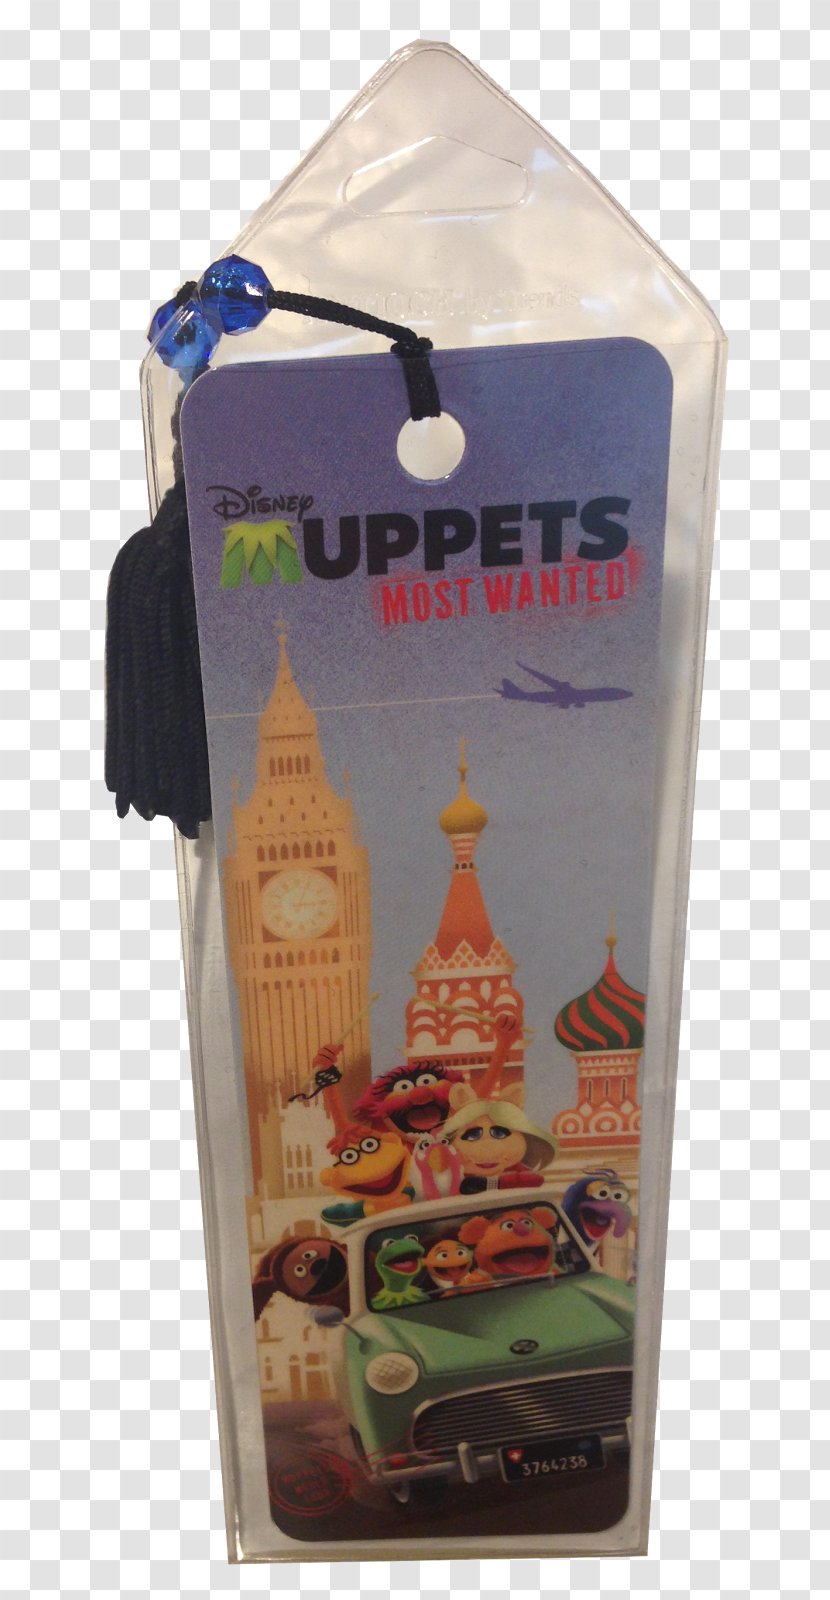 The Muppets Familienplaner Film Product Walt Disney Company - Most Wanted Transparent PNG